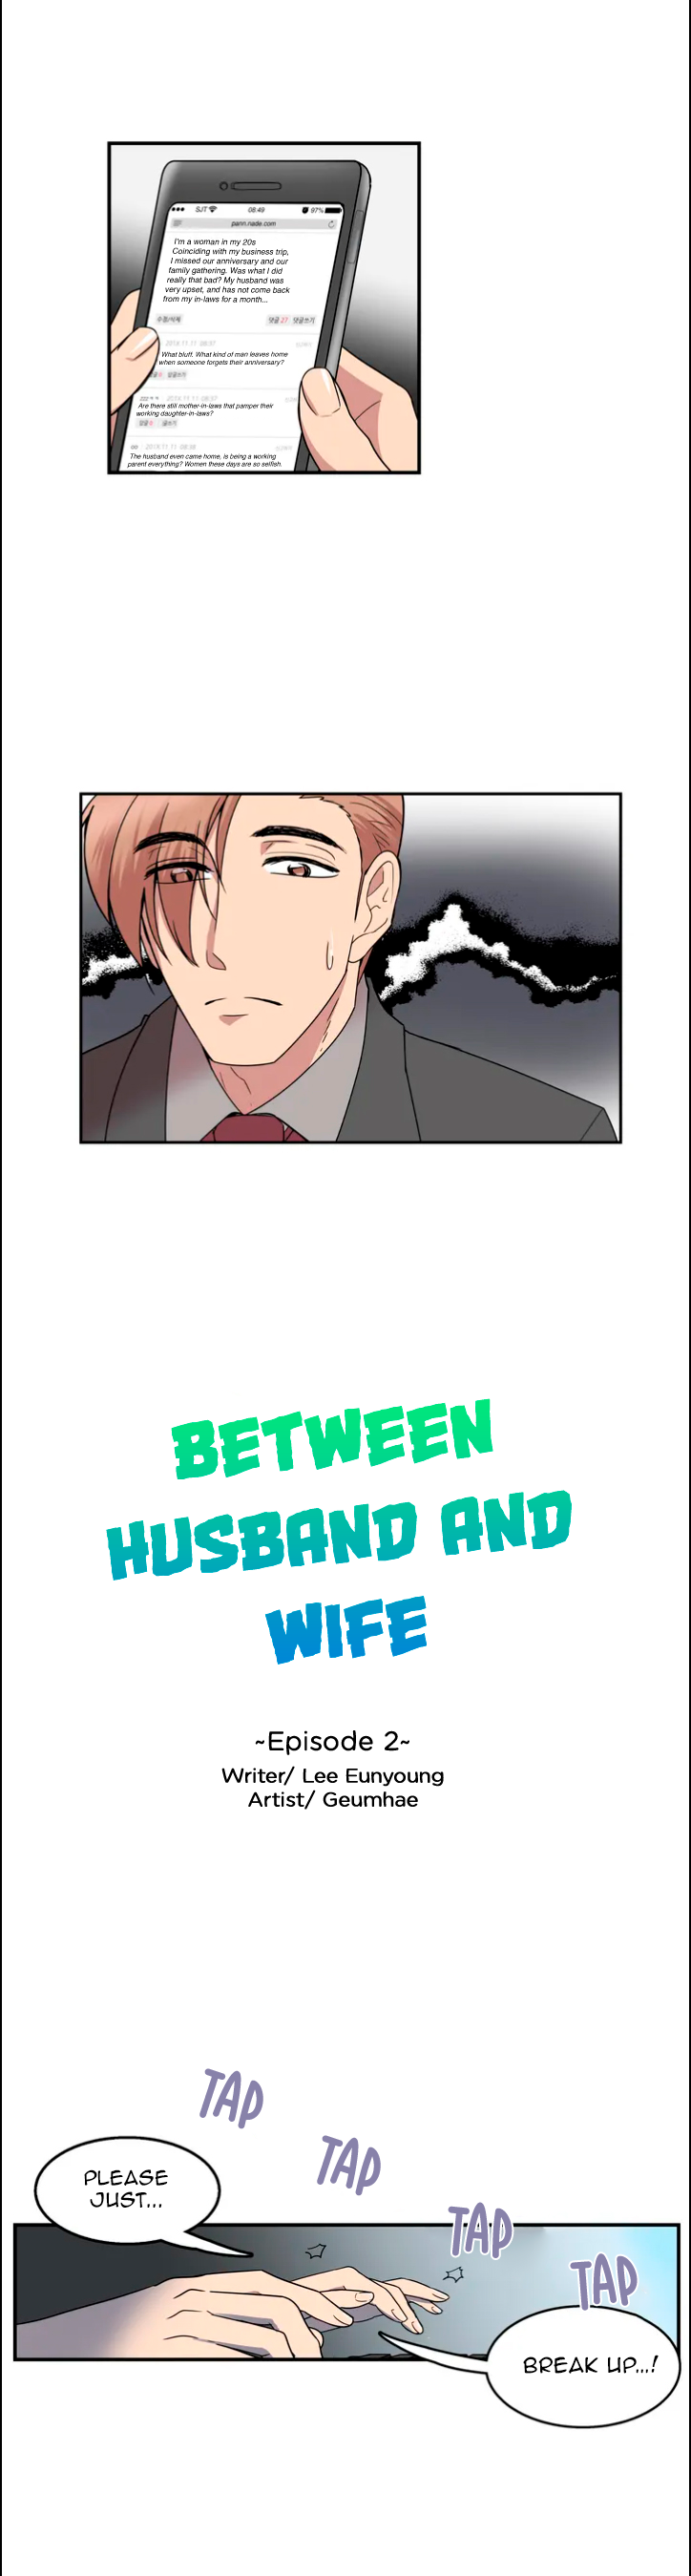 Between Husband And Wife - Page 2